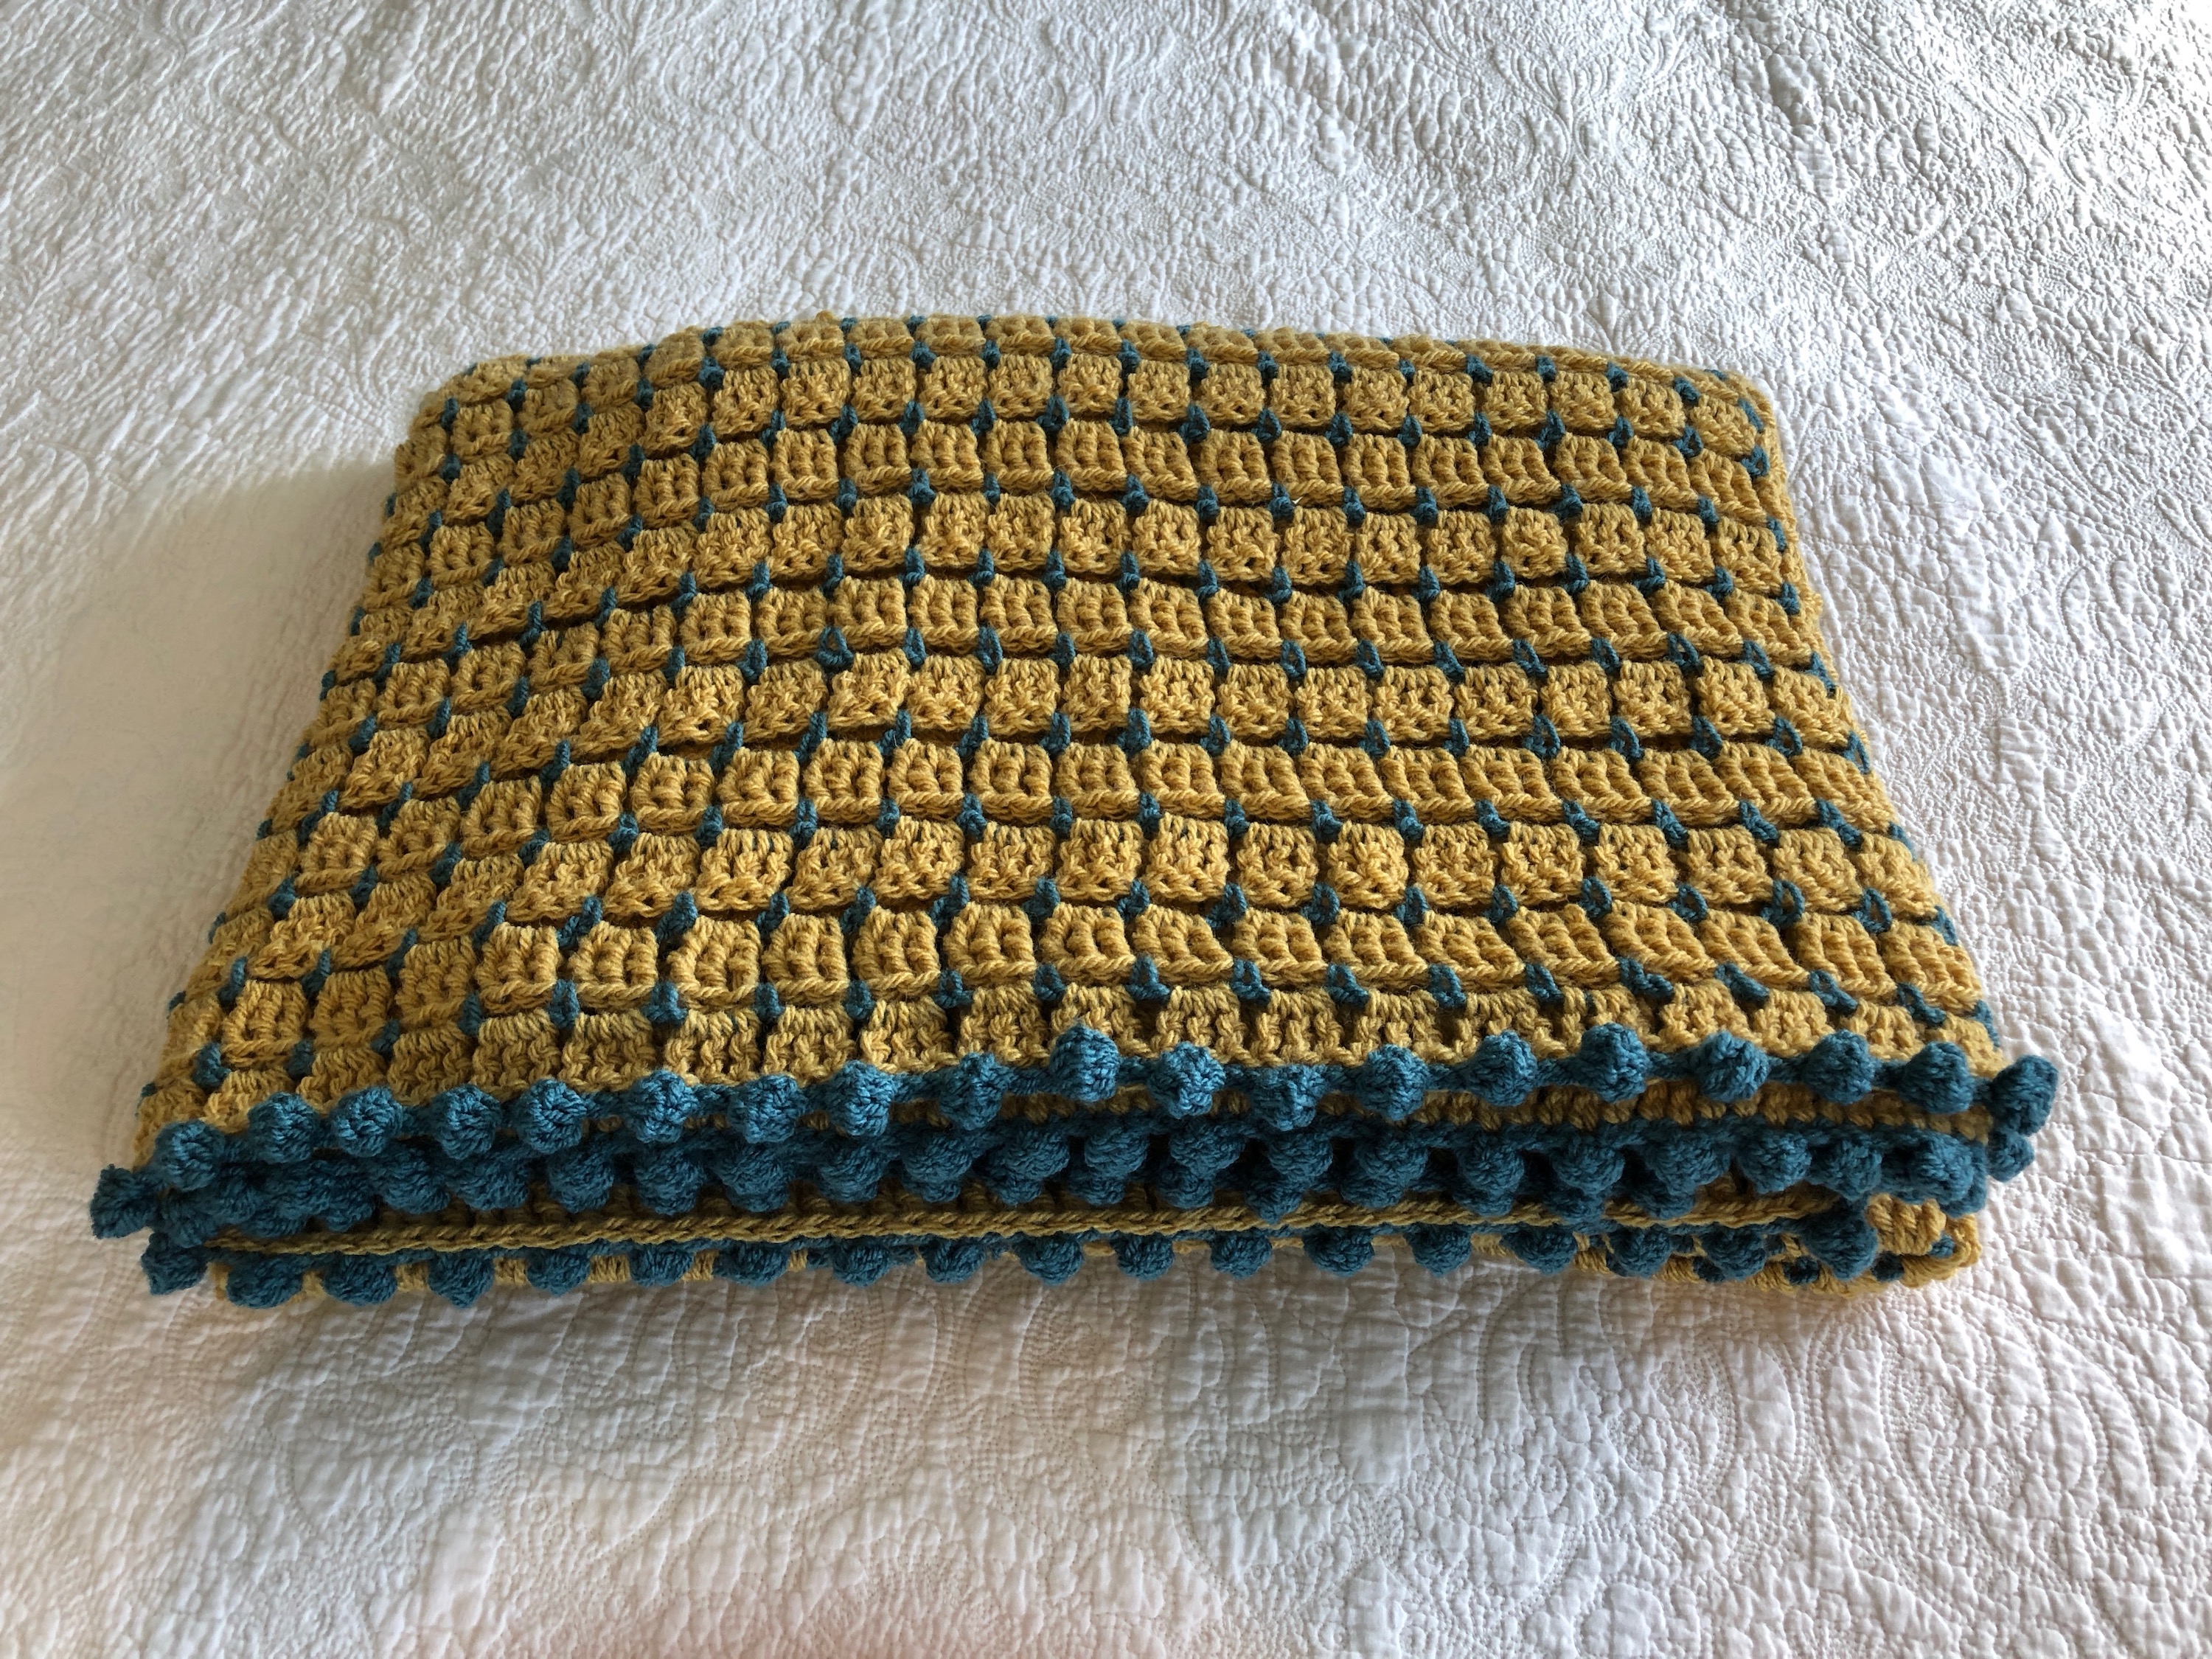 Block stitch blanket in mustard yellow and teal, with pom-pom edging.